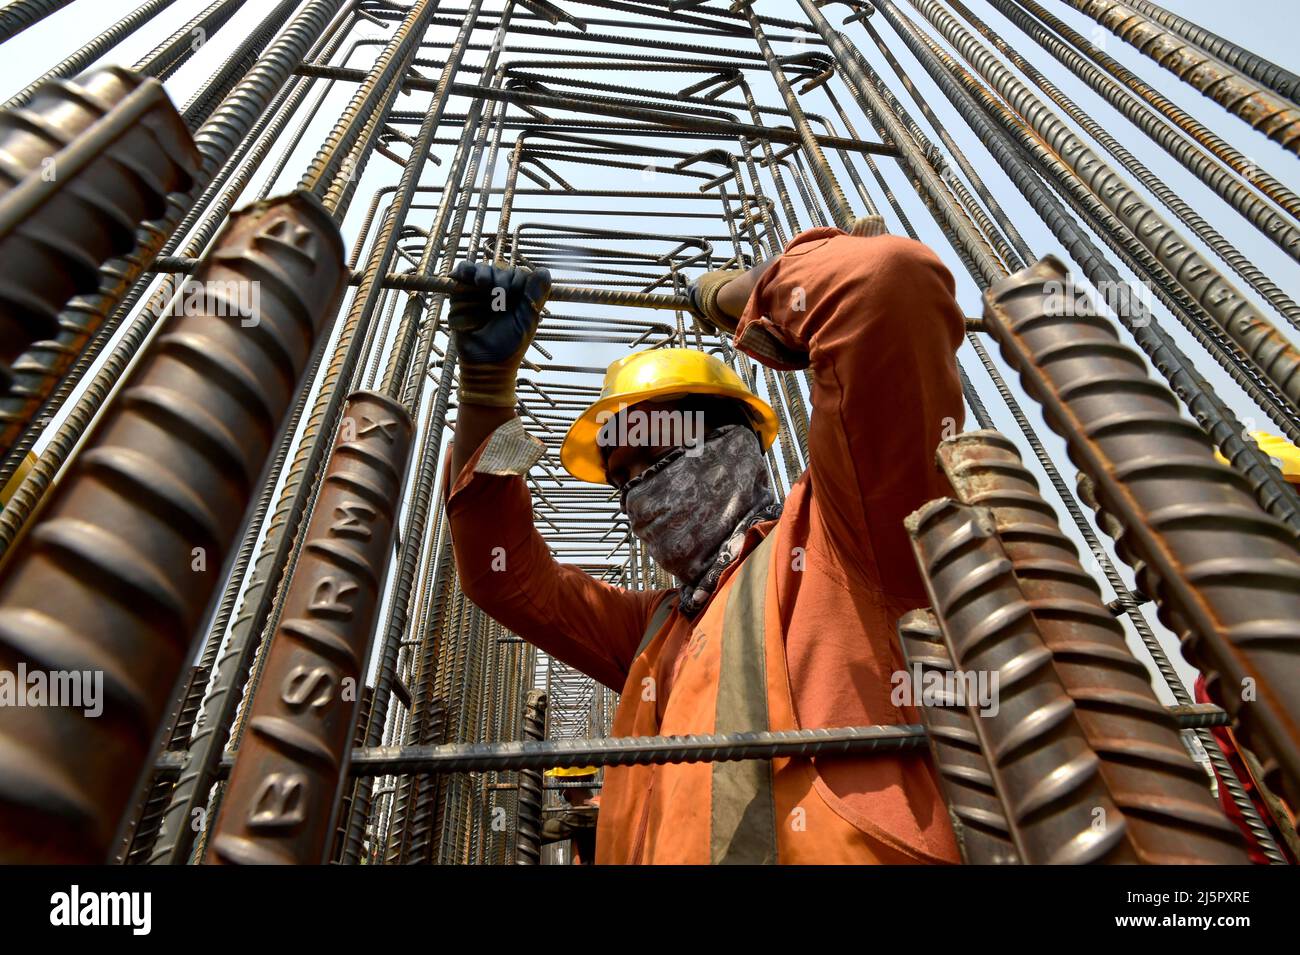 Dhaka. 25th Apr, 2022. A builder works at the construction site of the First Dhaka Elevated Expressway (FDEE) in Dhaka, Bangladesh, March 17, 2022. TO GO WITH 'Feature: Fast and safe, Sino-Bangladeshi expressway joint venture sees clear road ahead' Credit: Xinhua/Alamy Live News Stock Photo